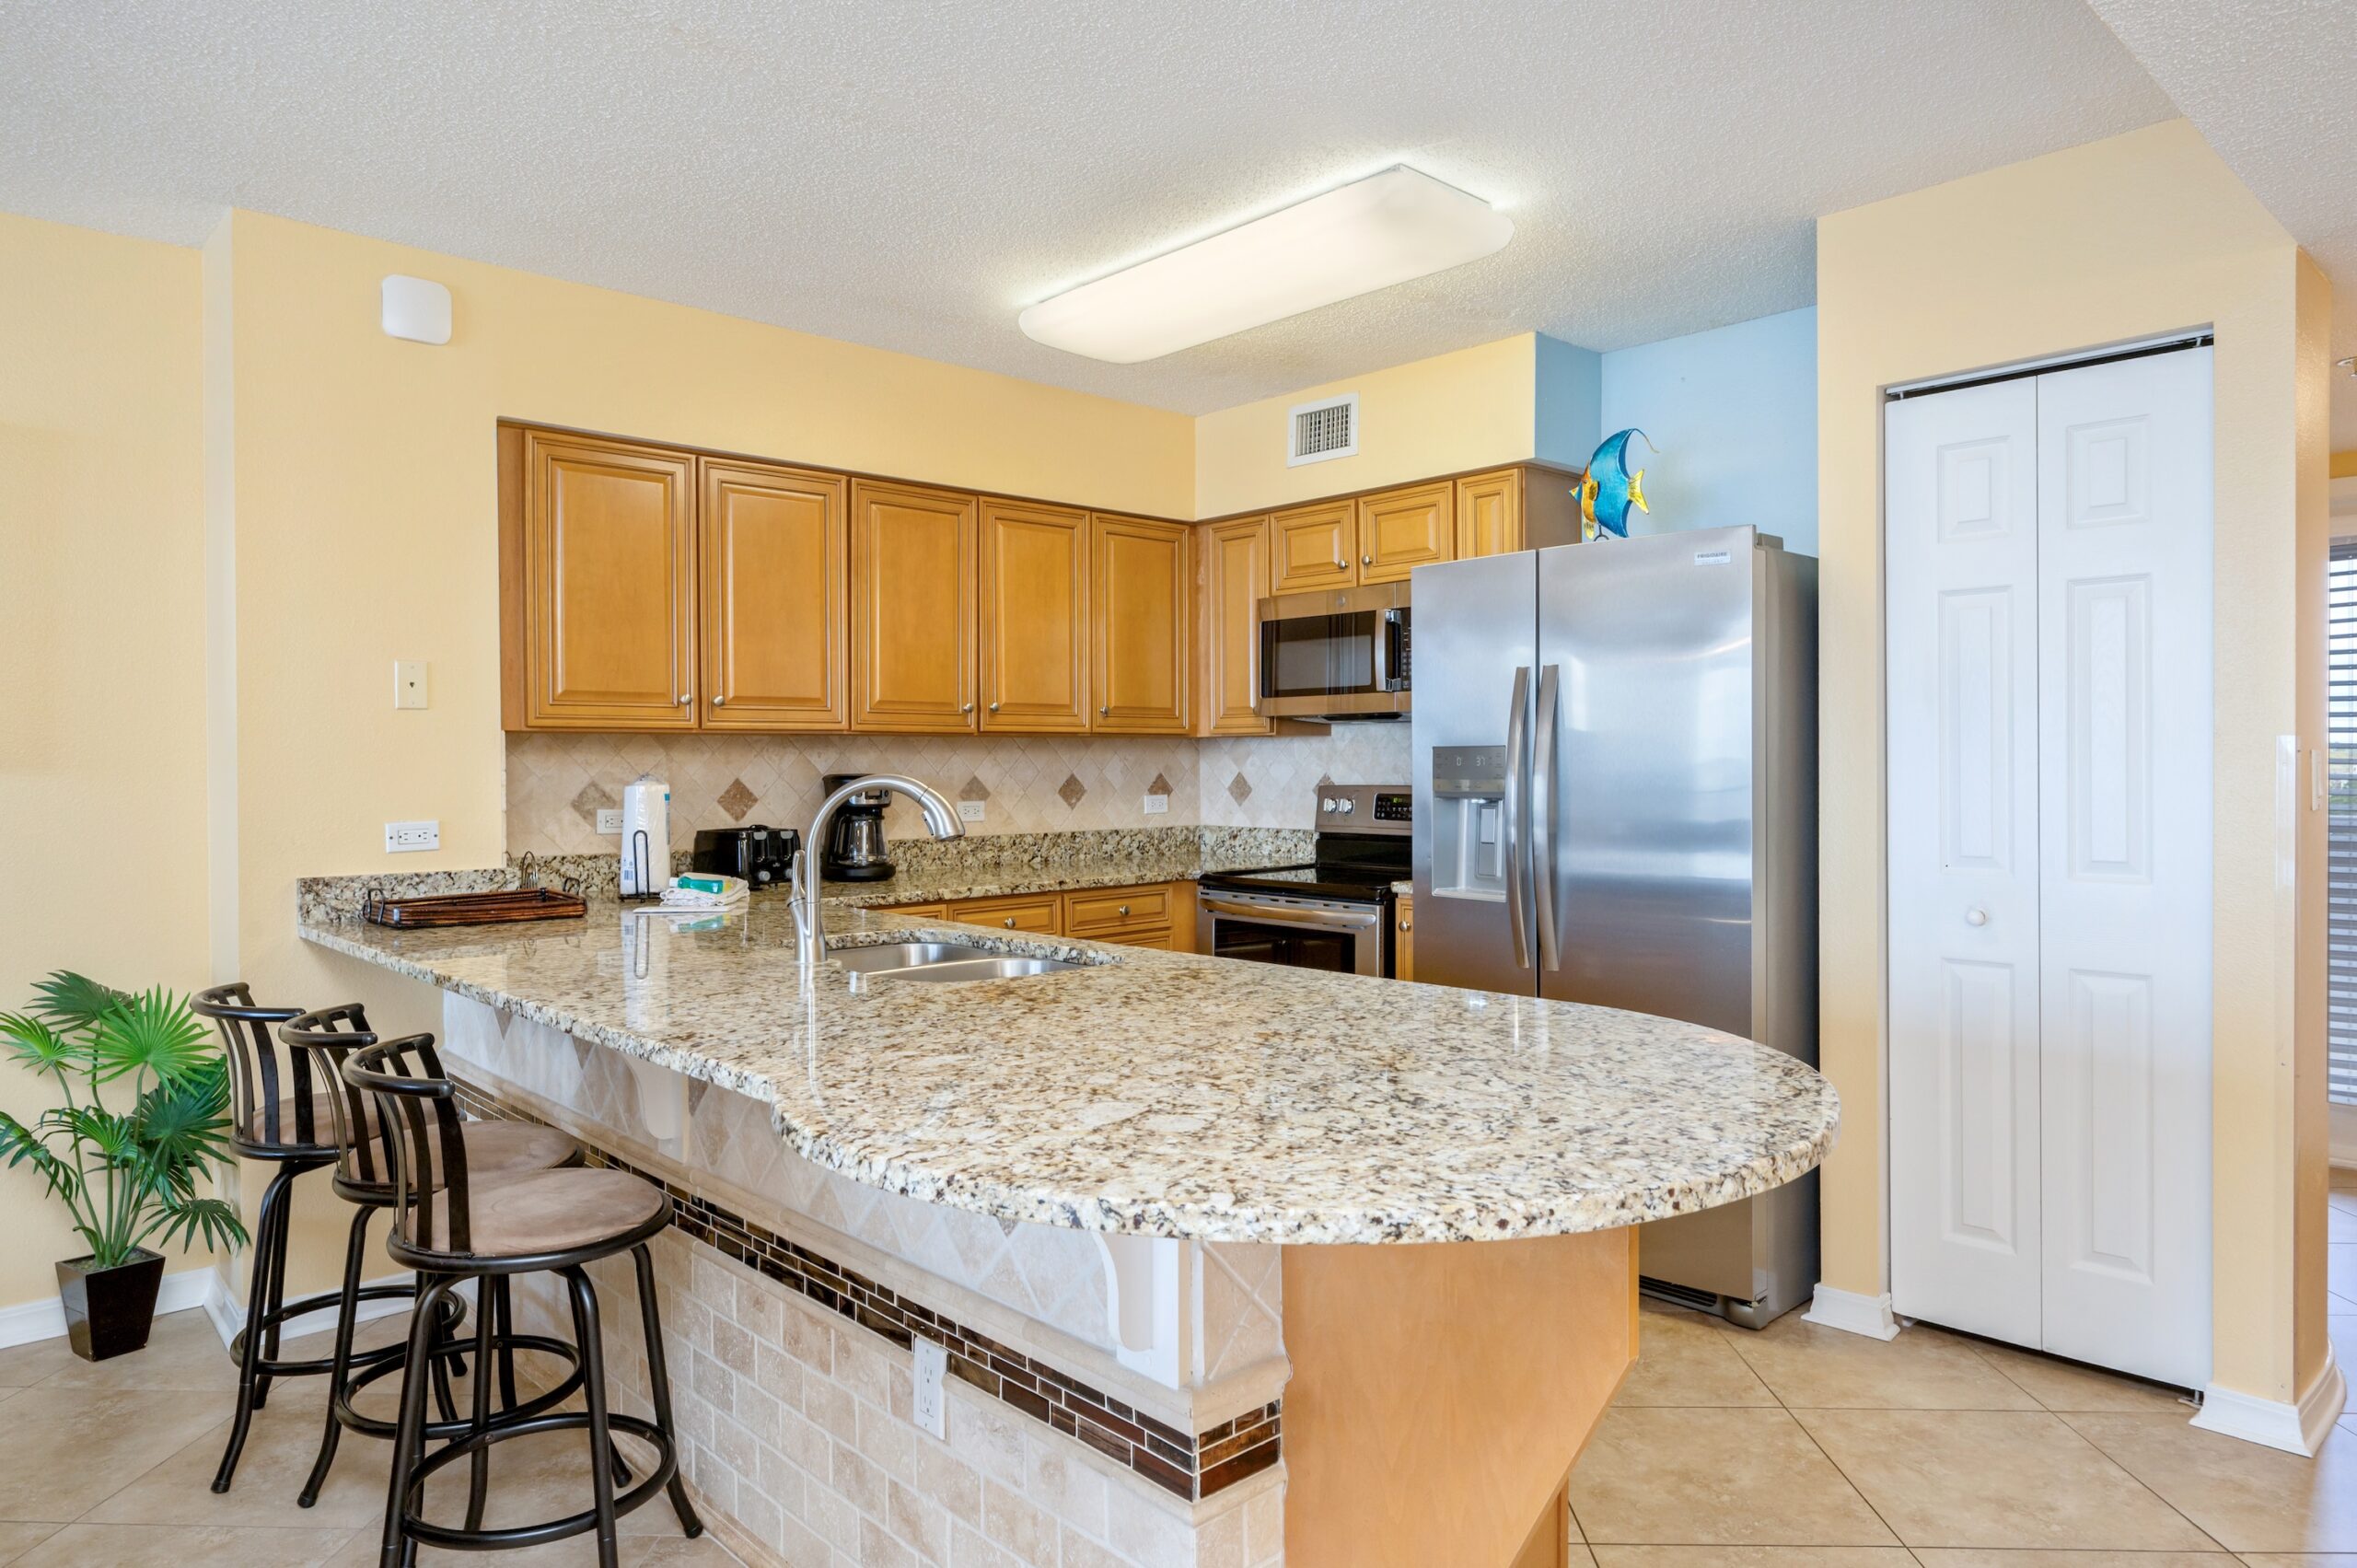 A beautiful kitchen awaits you in our beach condo